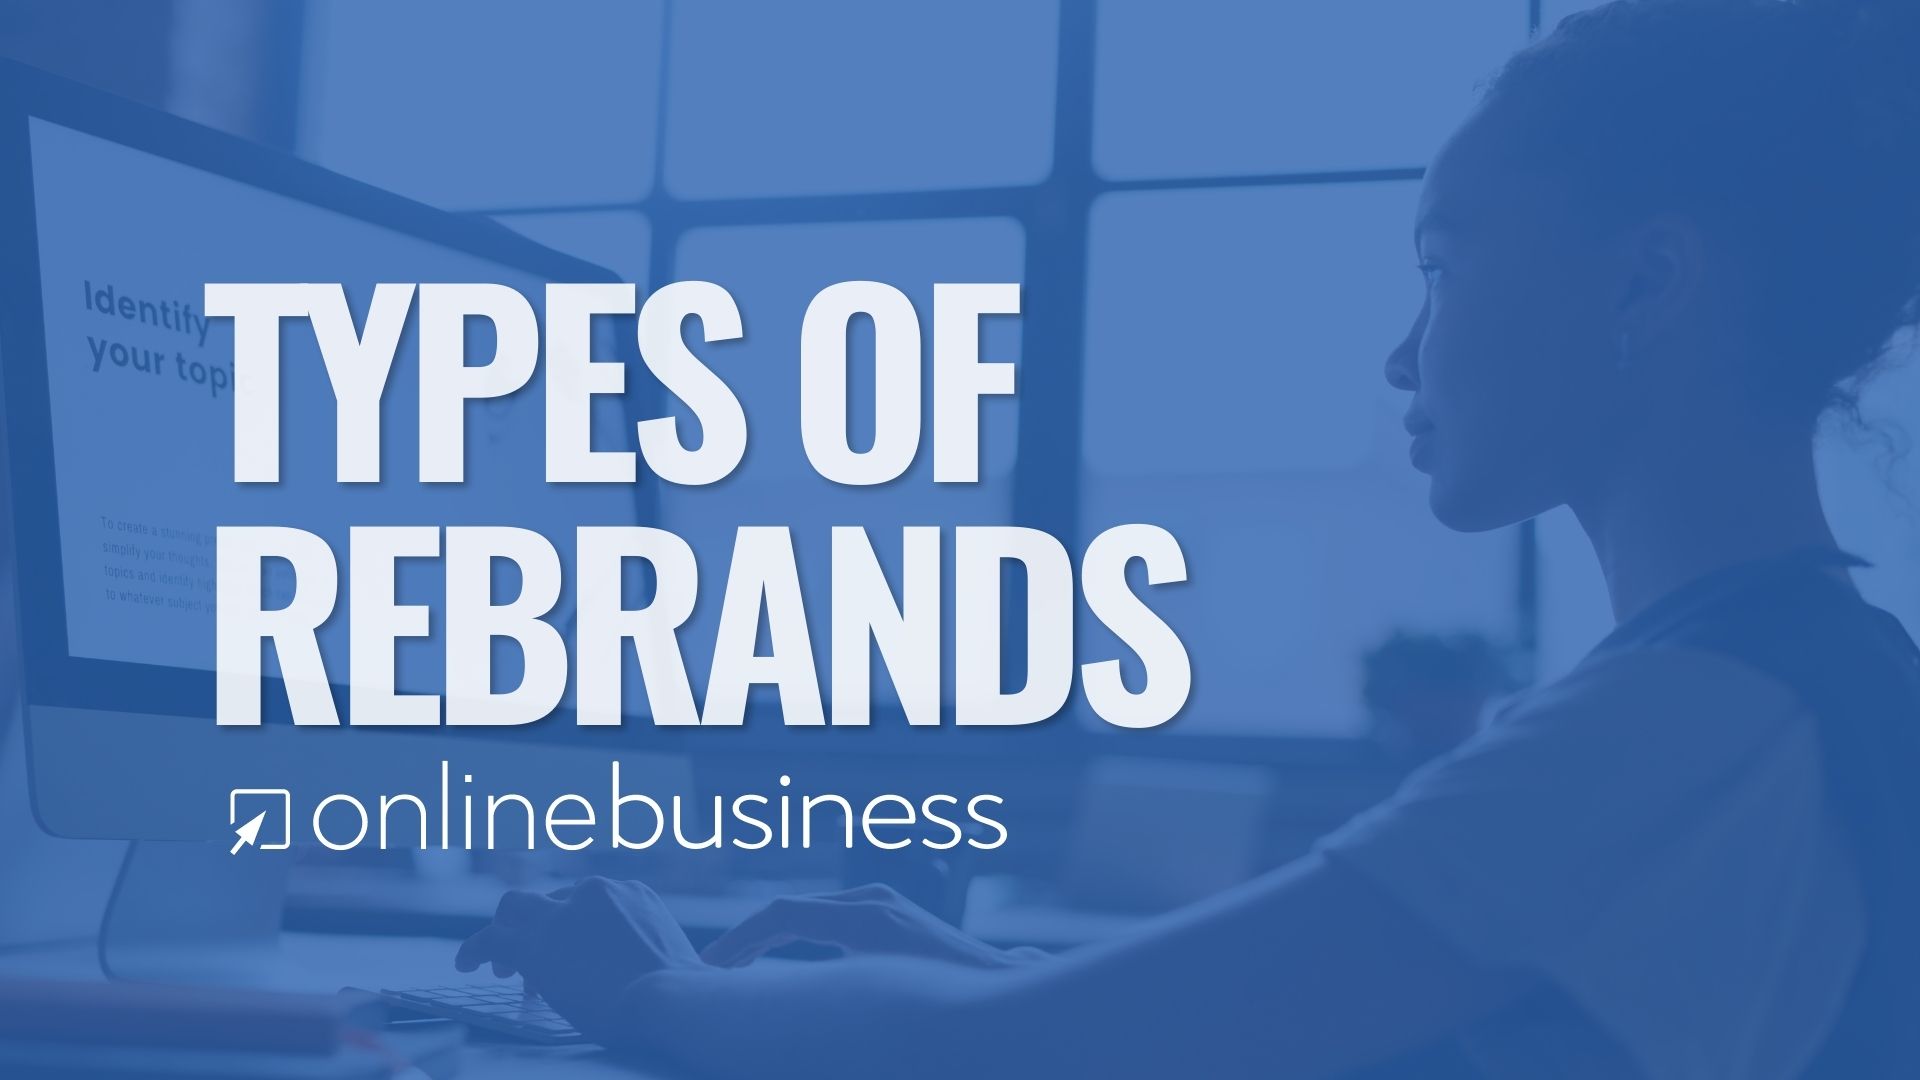 OnlineBusiness.com Discusses the Various Types of Rebrands